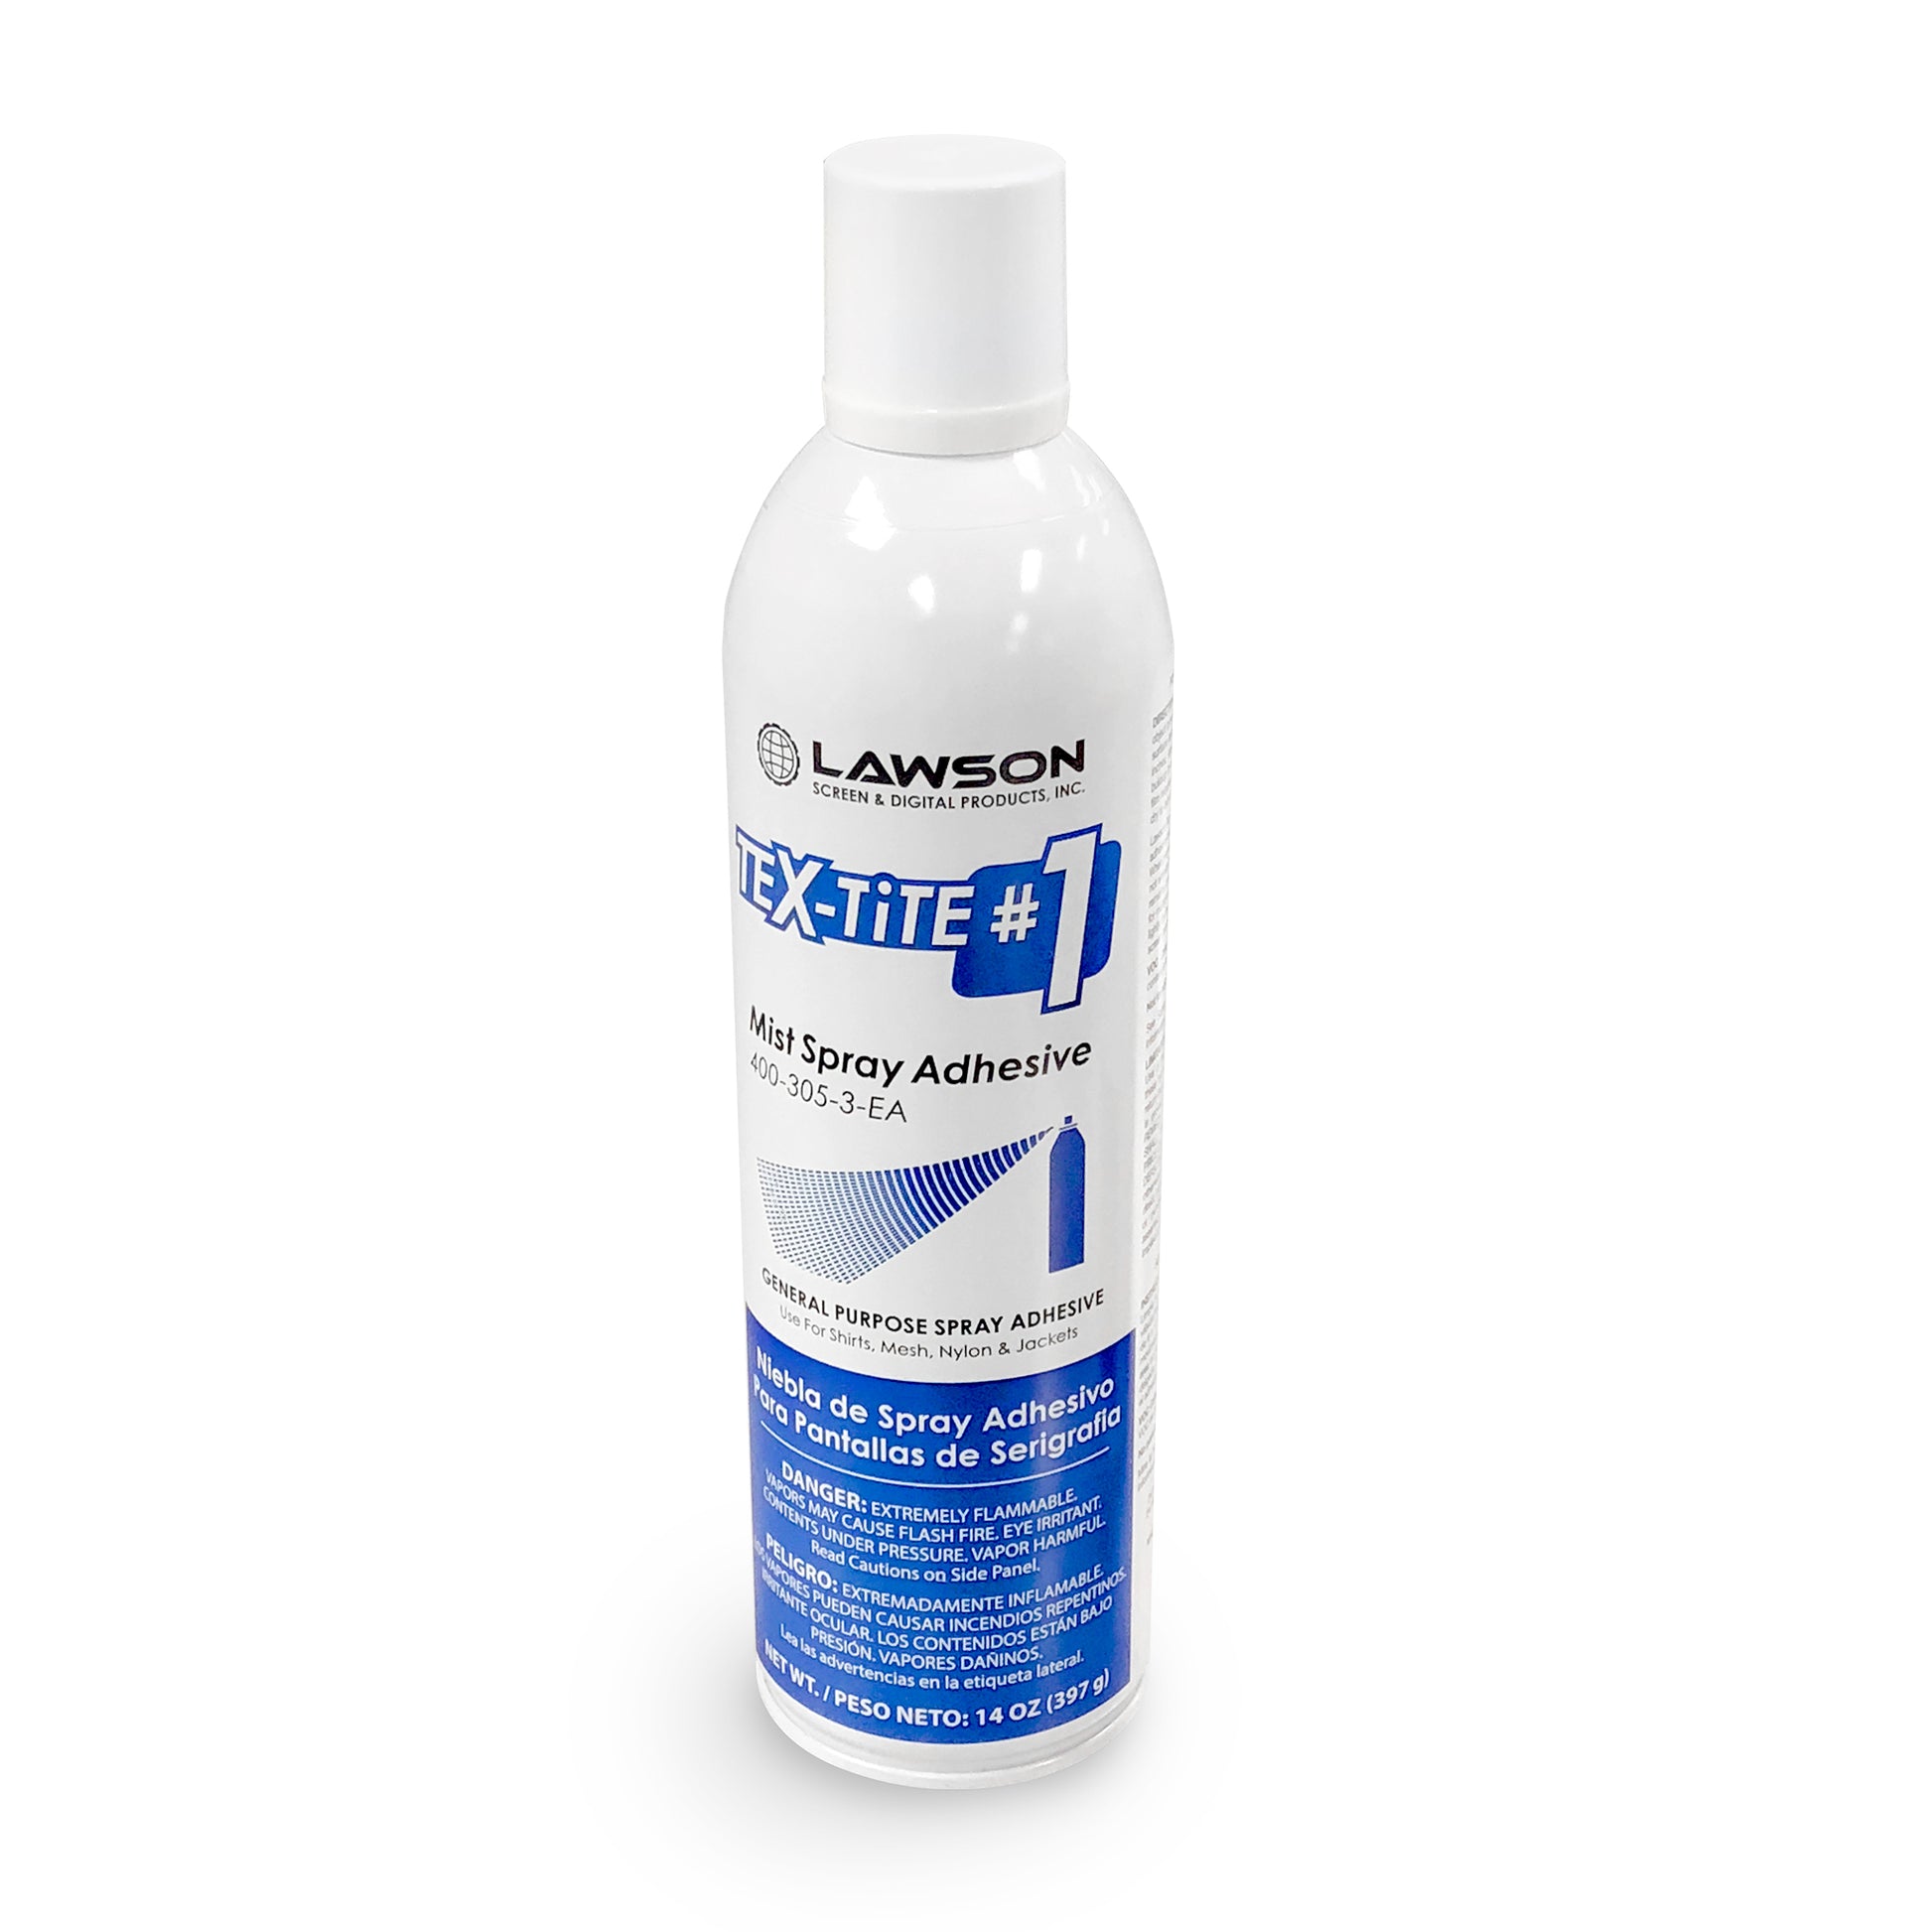 A Guide To Buying & Using Spray Adhesive Glue